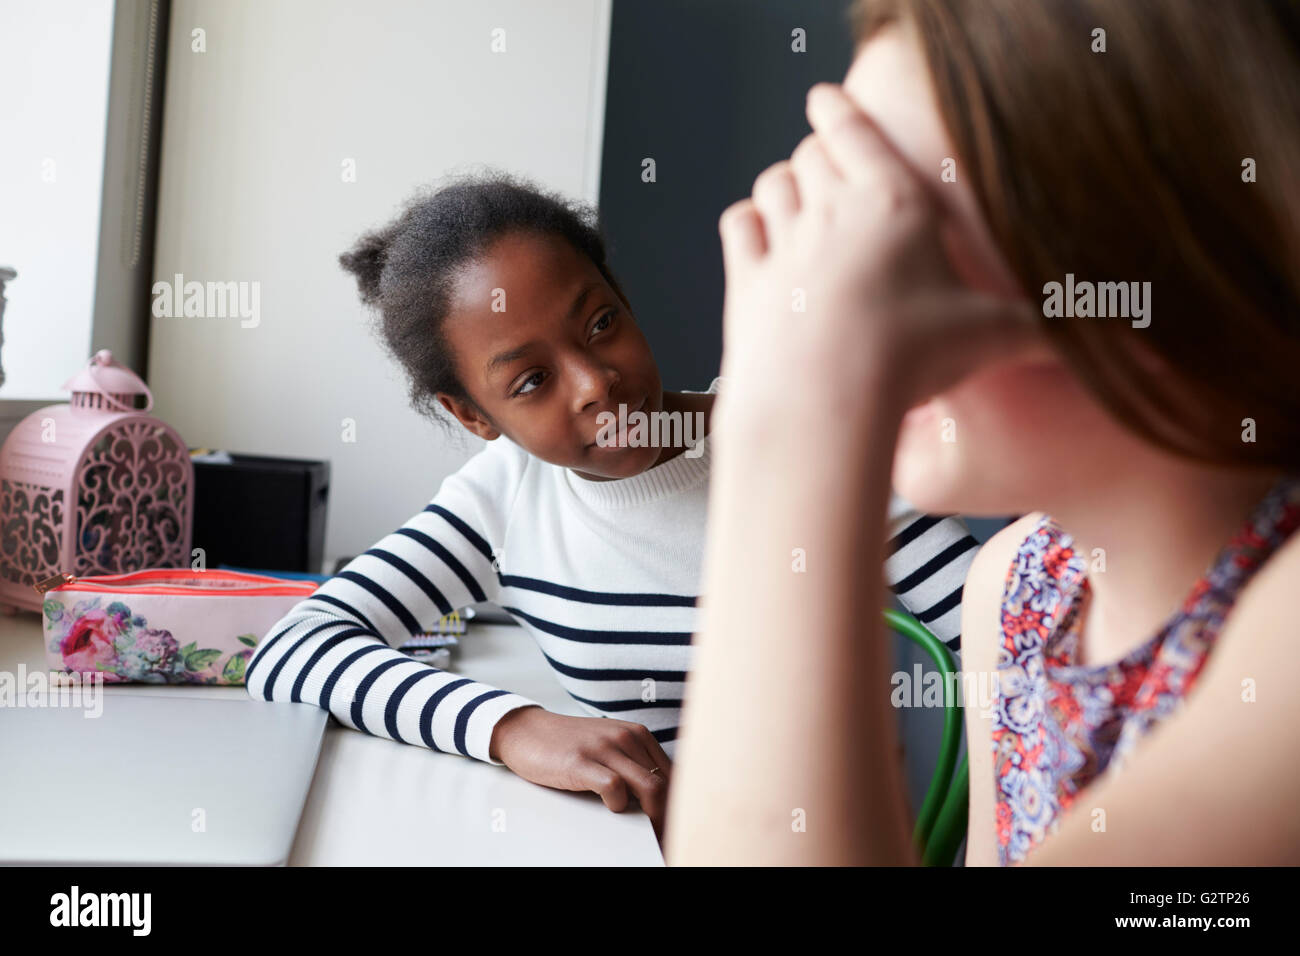 Teenage Girl Comforting Friend Suffering With Depression Stock Photo